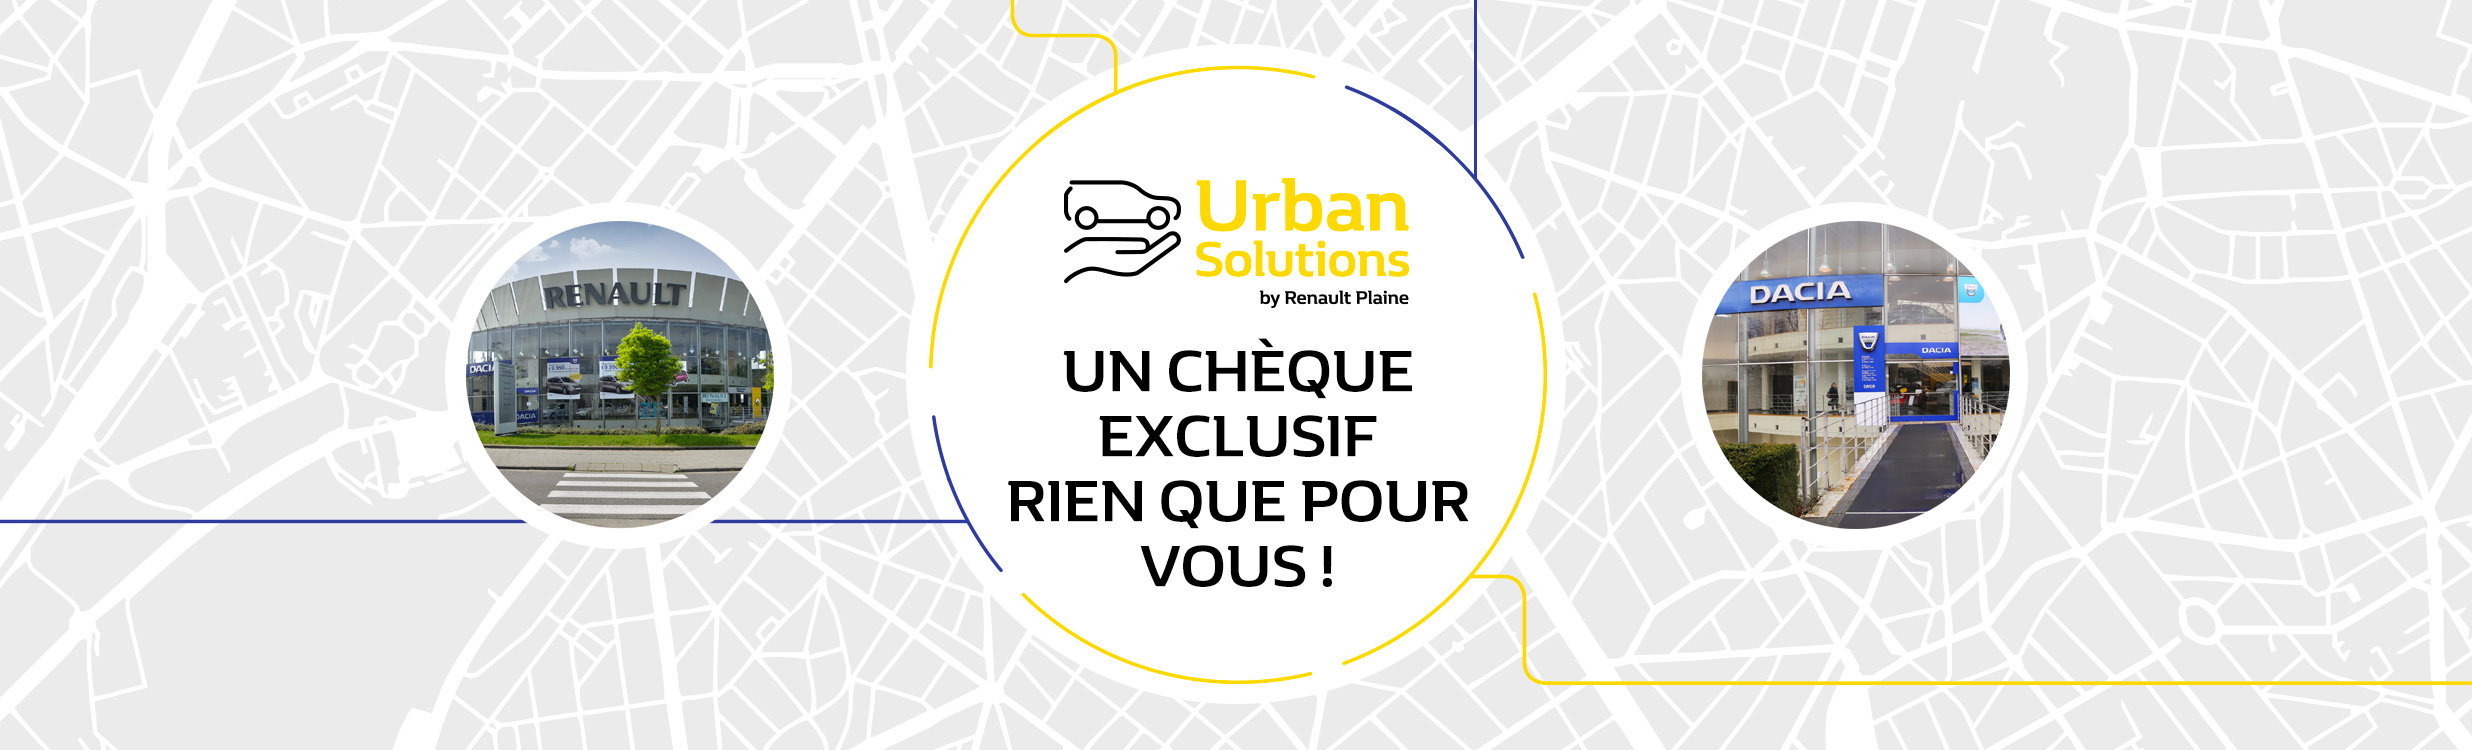 Urban Solutions by Renault Plaine